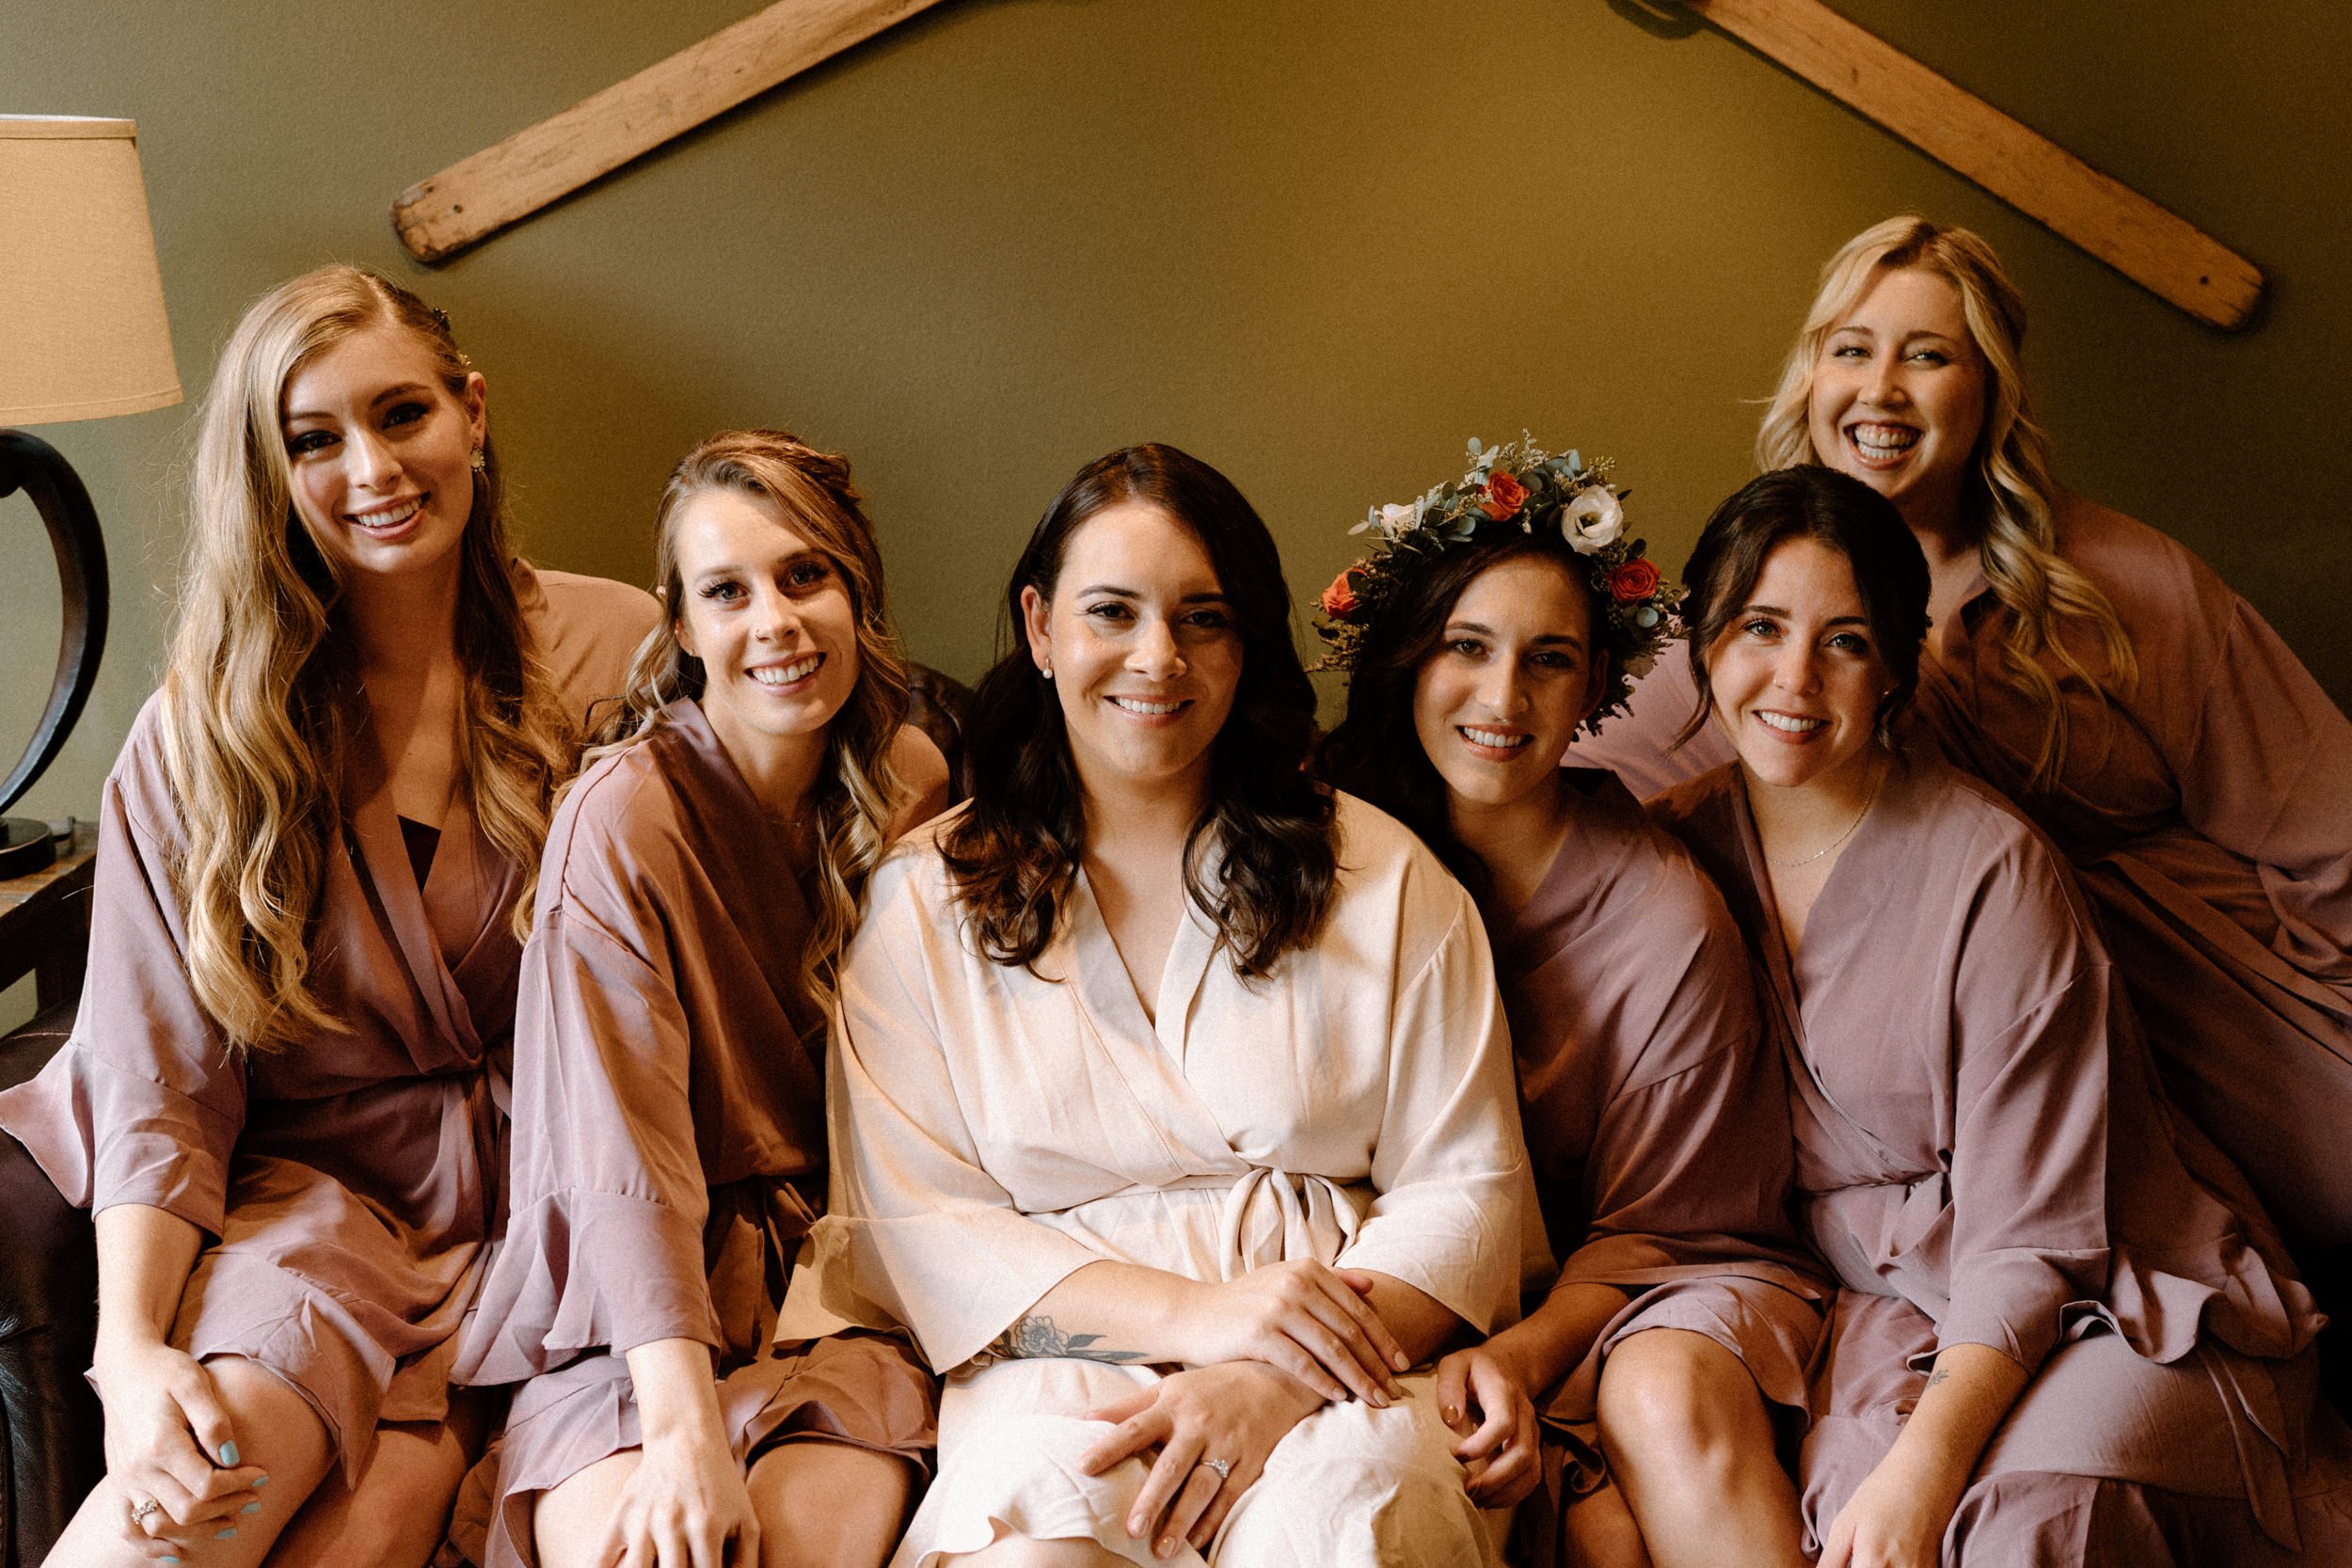 Bridal party poses in their matching robes while getting ready